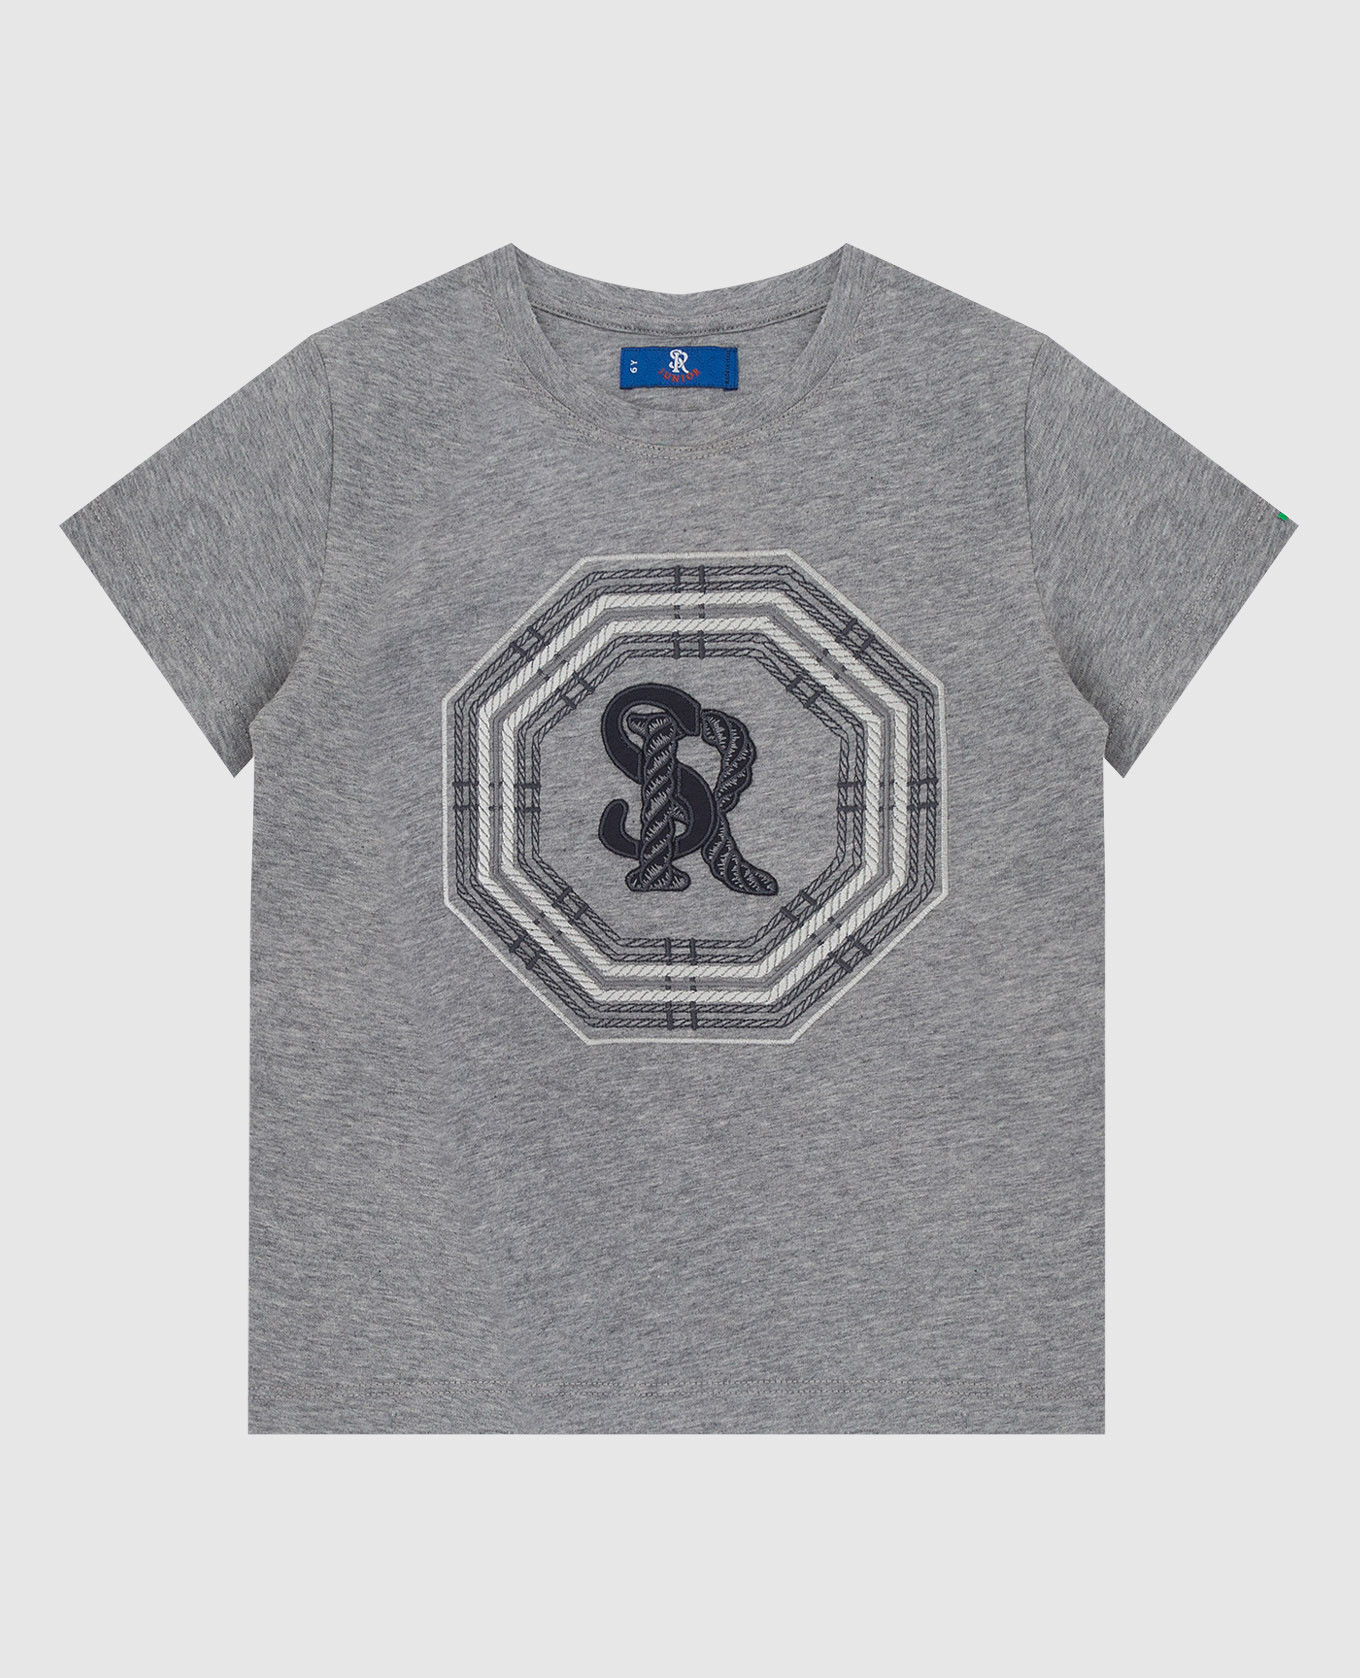 Children's gray t-shirt with monogram embroidery